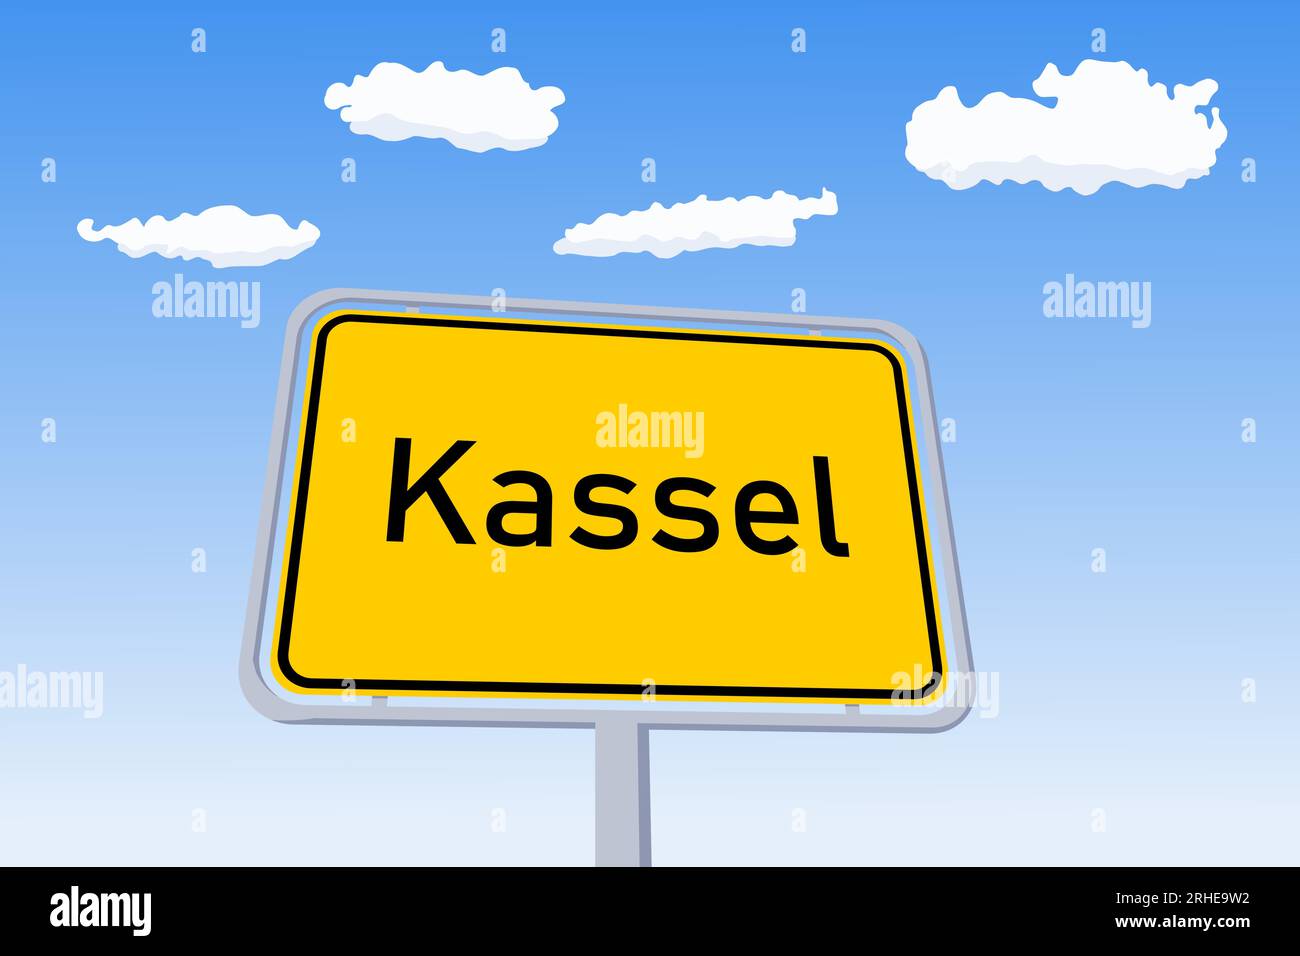 Kassel city sign in Germany. City name welcome road sign vector illustration. Stock Vector